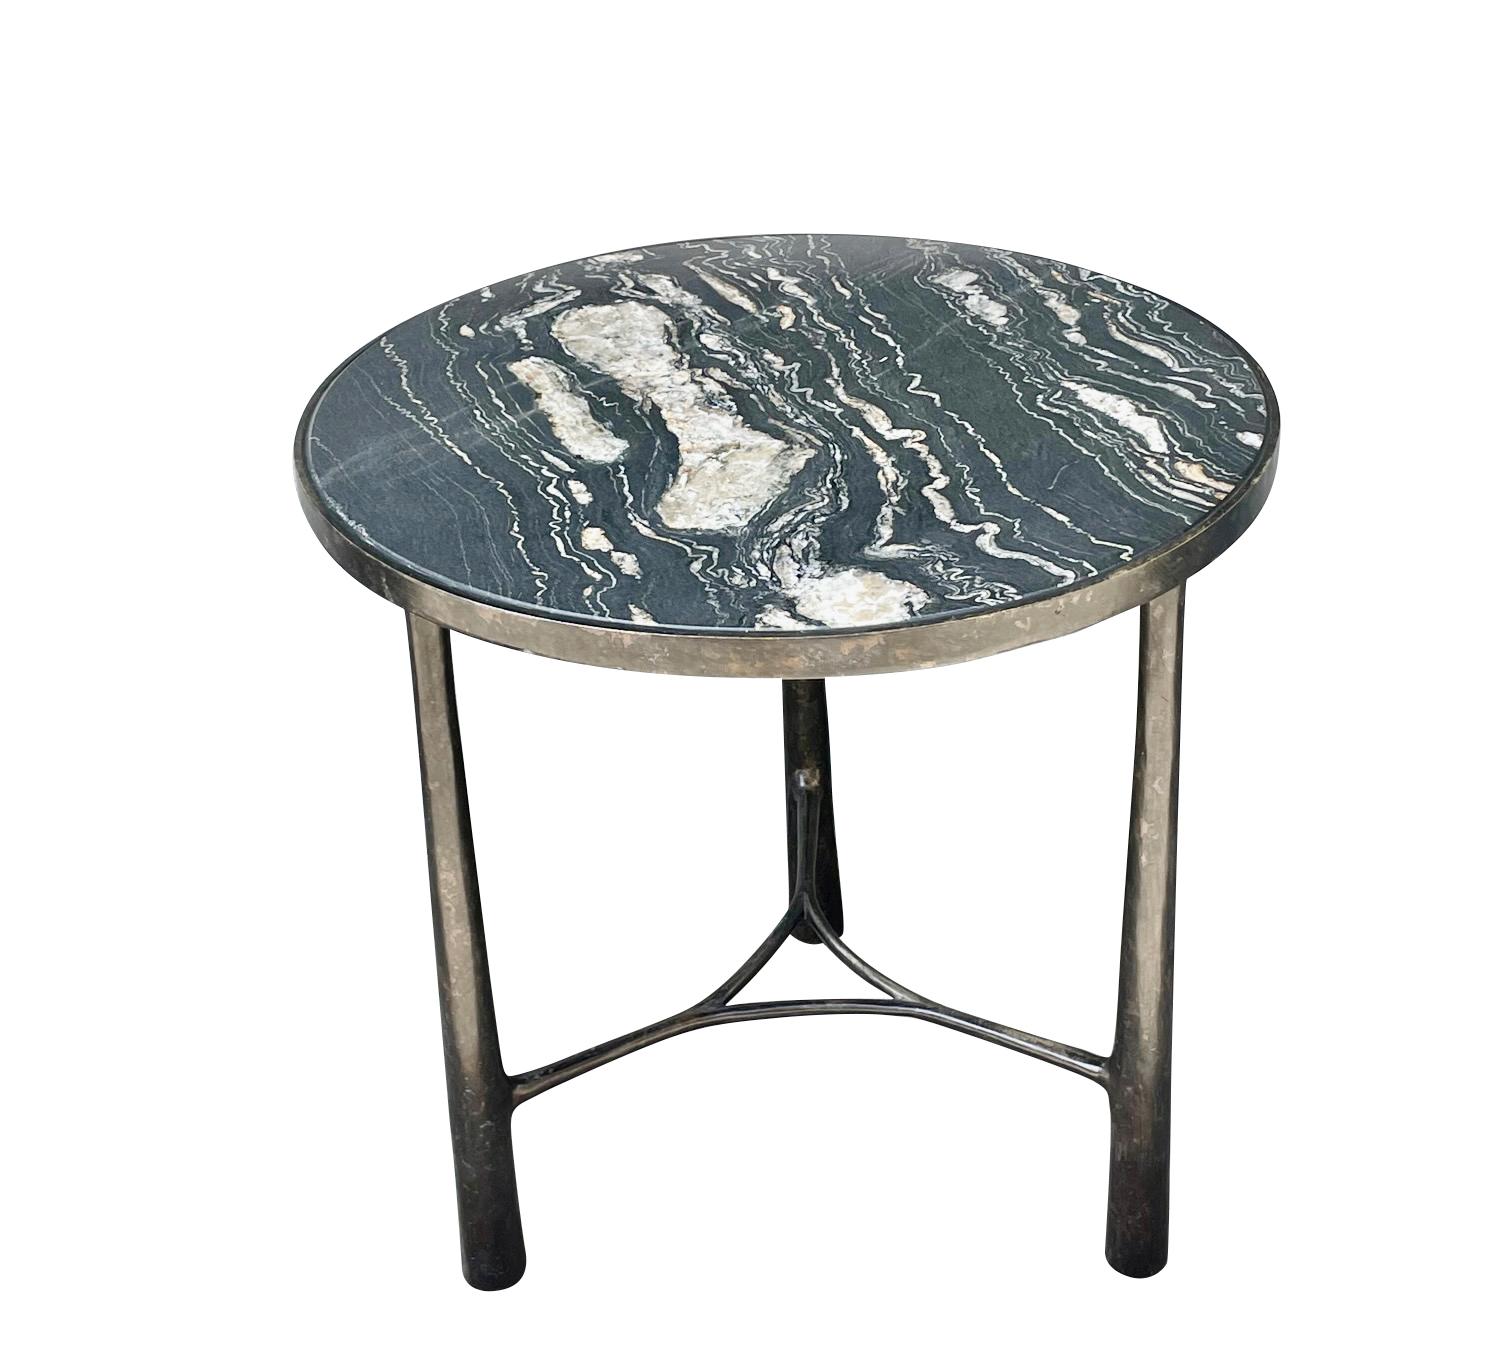 Contemporary German bronze coffee table with black and white marble top.
Three tubular legs.